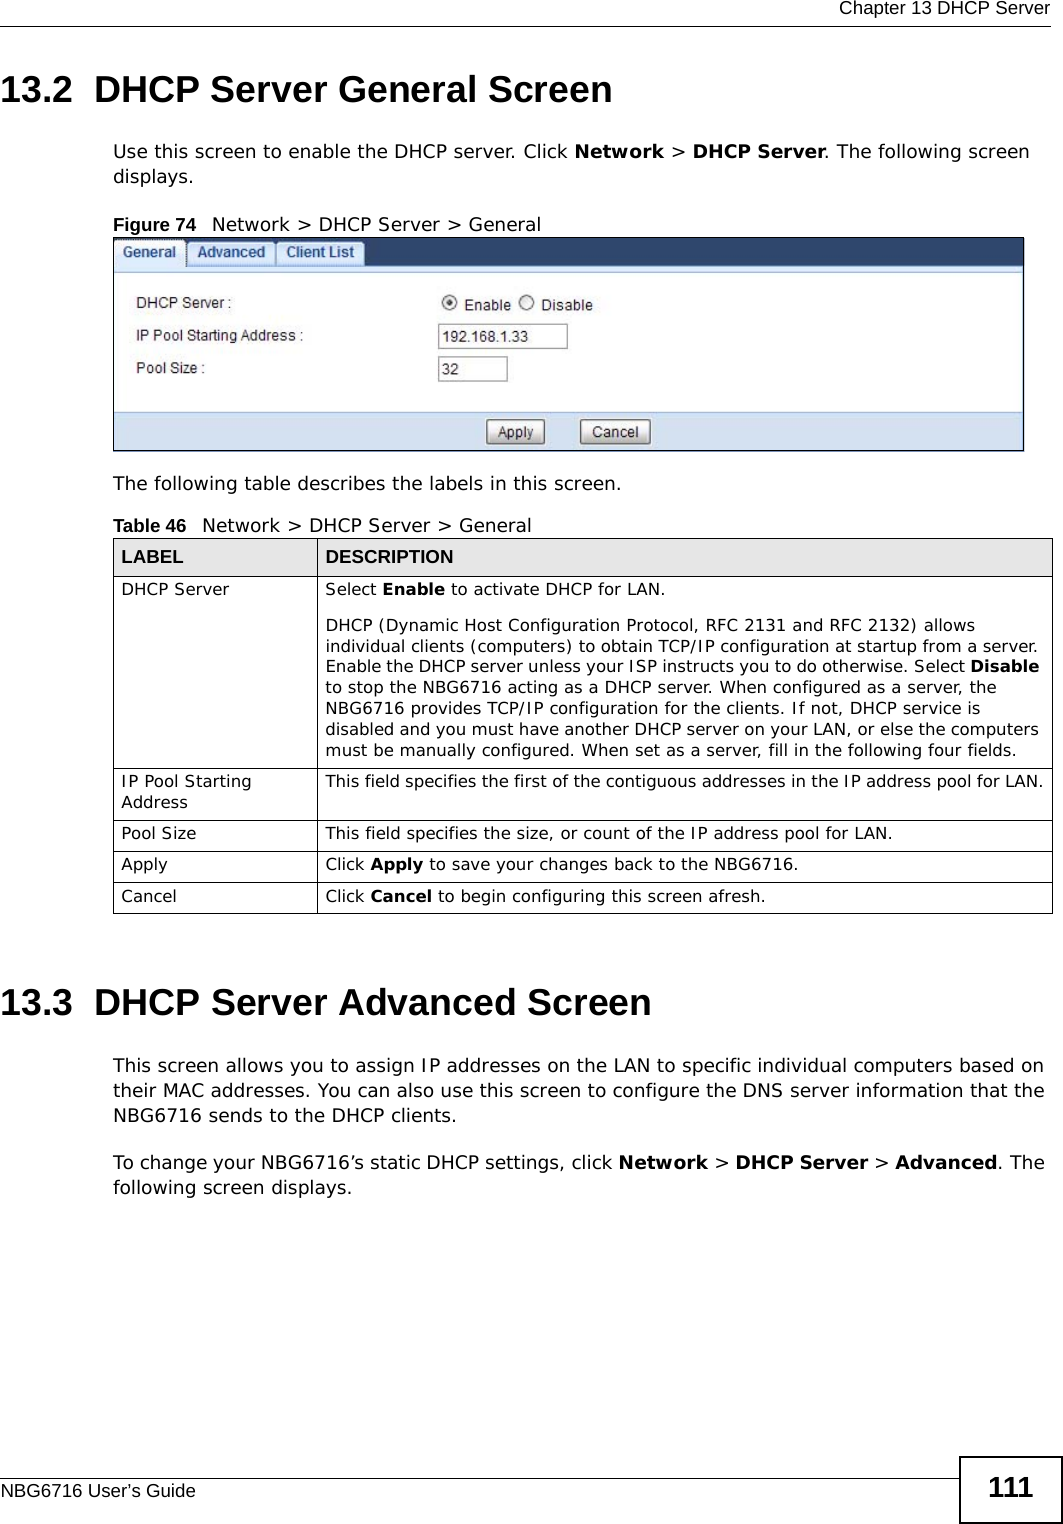  Chapter 13 DHCP ServerNBG6716 User’s Guide 11113.2  DHCP Server General ScreenUse this screen to enable the DHCP server. Click Network &gt; DHCP Server. The following screen displays.Figure 74   Network &gt; DHCP Server &gt; General   The following table describes the labels in this screen.13.3  DHCP Server Advanced Screen    This screen allows you to assign IP addresses on the LAN to specific individual computers based on their MAC addresses. You can also use this screen to configure the DNS server information that the NBG6716 sends to the DHCP clients.To change your NBG6716’s static DHCP settings, click Network &gt; DHCP Server &gt; Advanced. The following screen displays.Table 46   Network &gt; DHCP Server &gt; General  LABEL DESCRIPTIONDHCP Server Select Enable to activate DHCP for LAN.DHCP (Dynamic Host Configuration Protocol, RFC 2131 and RFC 2132) allows individual clients (computers) to obtain TCP/IP configuration at startup from a server. Enable the DHCP server unless your ISP instructs you to do otherwise. Select Disable to stop the NBG6716 acting as a DHCP server. When configured as a server, the NBG6716 provides TCP/IP configuration for the clients. If not, DHCP service is disabled and you must have another DHCP server on your LAN, or else the computers must be manually configured. When set as a server, fill in the following four fields.IP Pool Starting Address This field specifies the first of the contiguous addresses in the IP address pool for LAN.Pool Size This field specifies the size, or count of the IP address pool for LAN.Apply Click Apply to save your changes back to the NBG6716.Cancel Click Cancel to begin configuring this screen afresh.